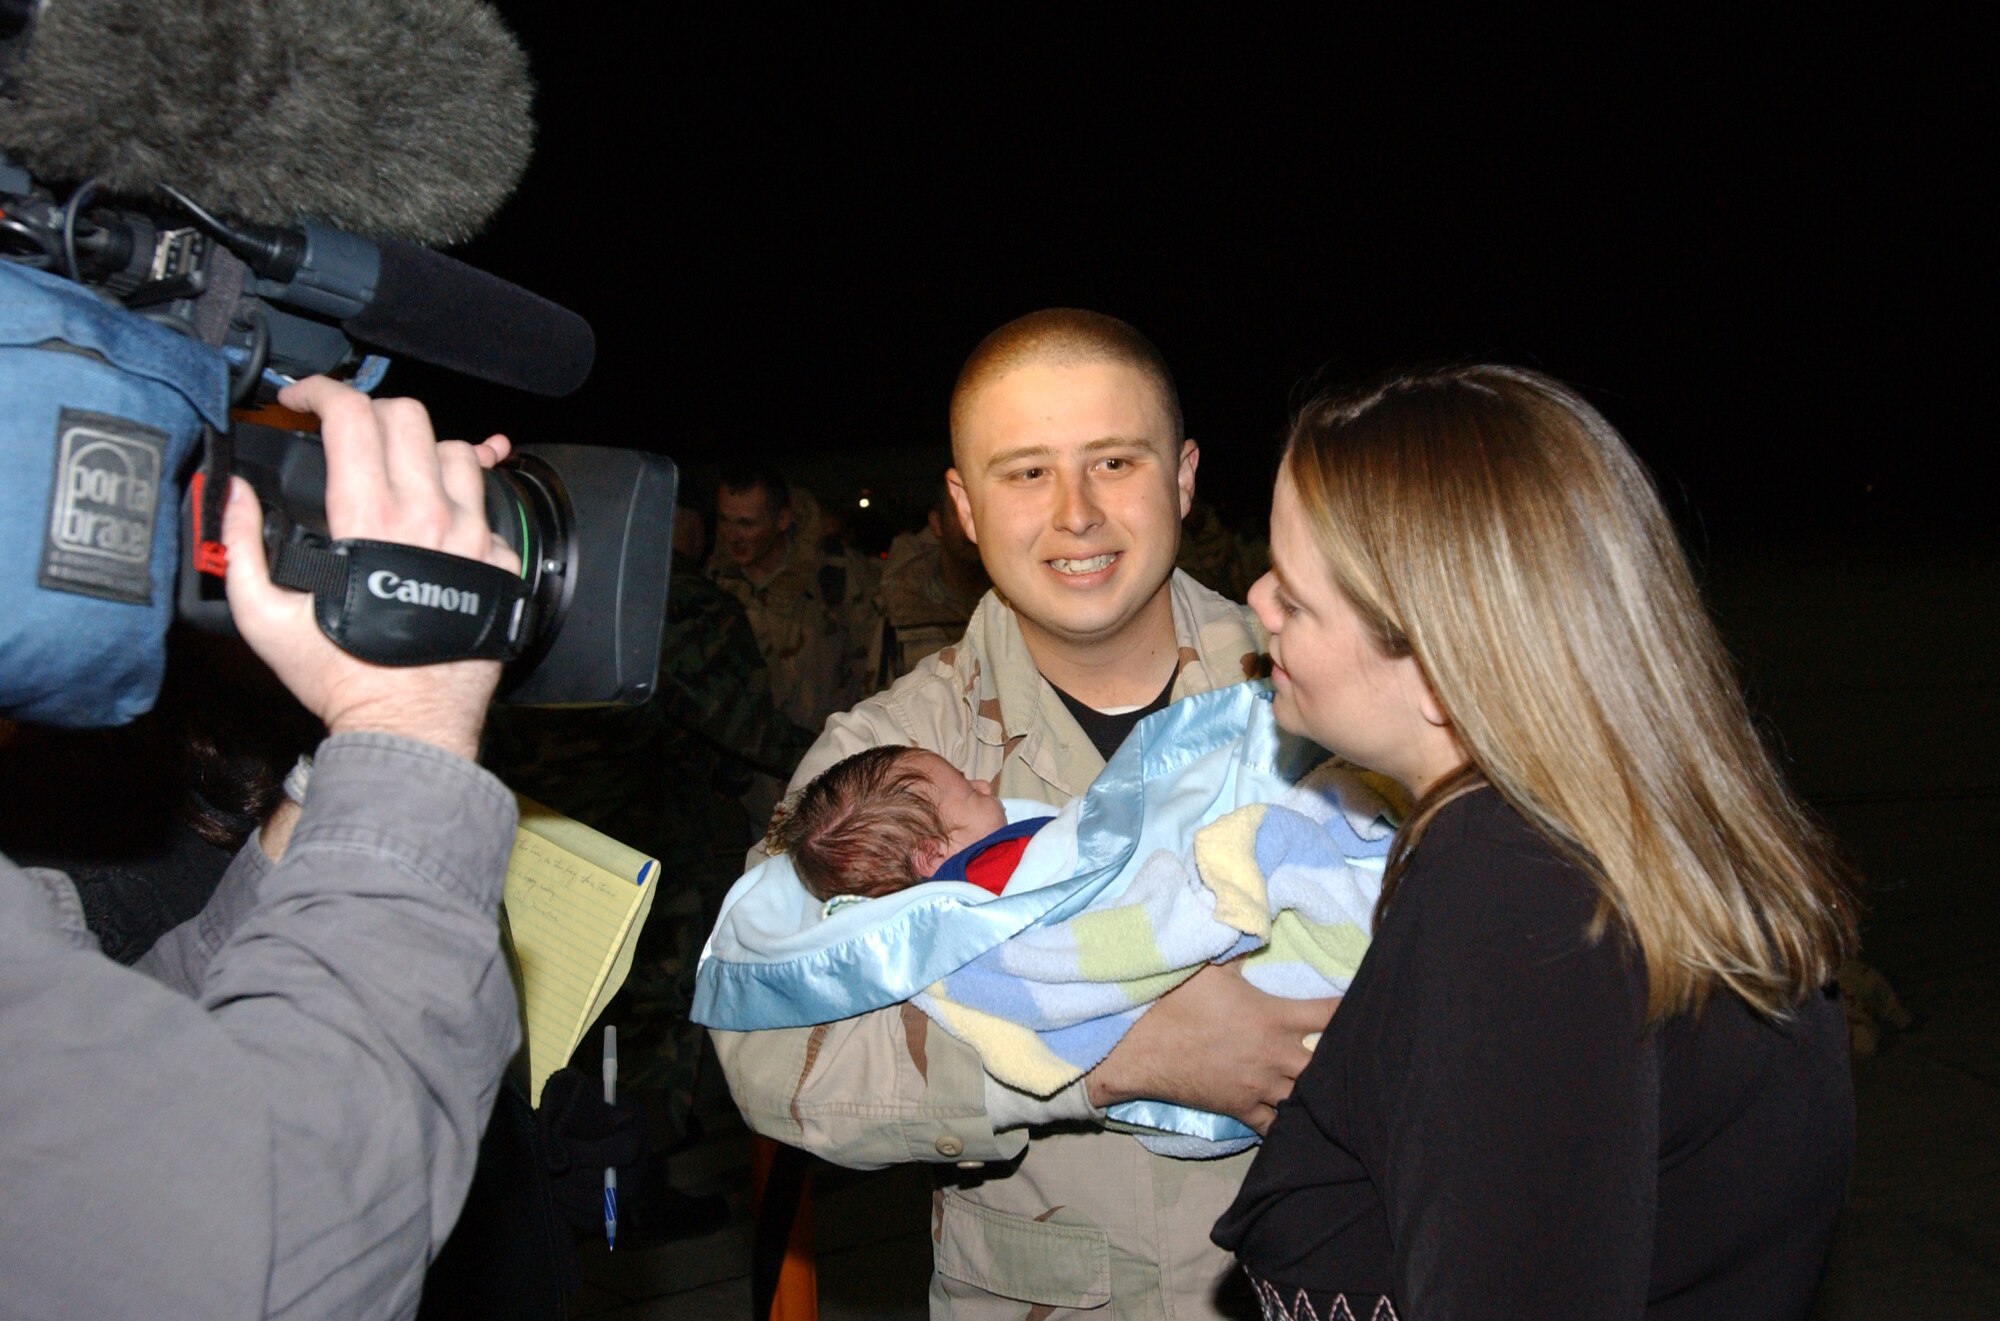 Senior Airman Anthony Navejas, 99th Security Forces Squadron, is greeted by his wife, Jessica, and 12-day-old son, Hayden,  as he returns to Nellis Air Force Base, Nev., after an eight-month deployment to Iraq. Seventy-two security forces Airmen returned to Nellis Dec. 12. (U.S. Air Force photo/Staff Sgt. Jeremy Smith)  